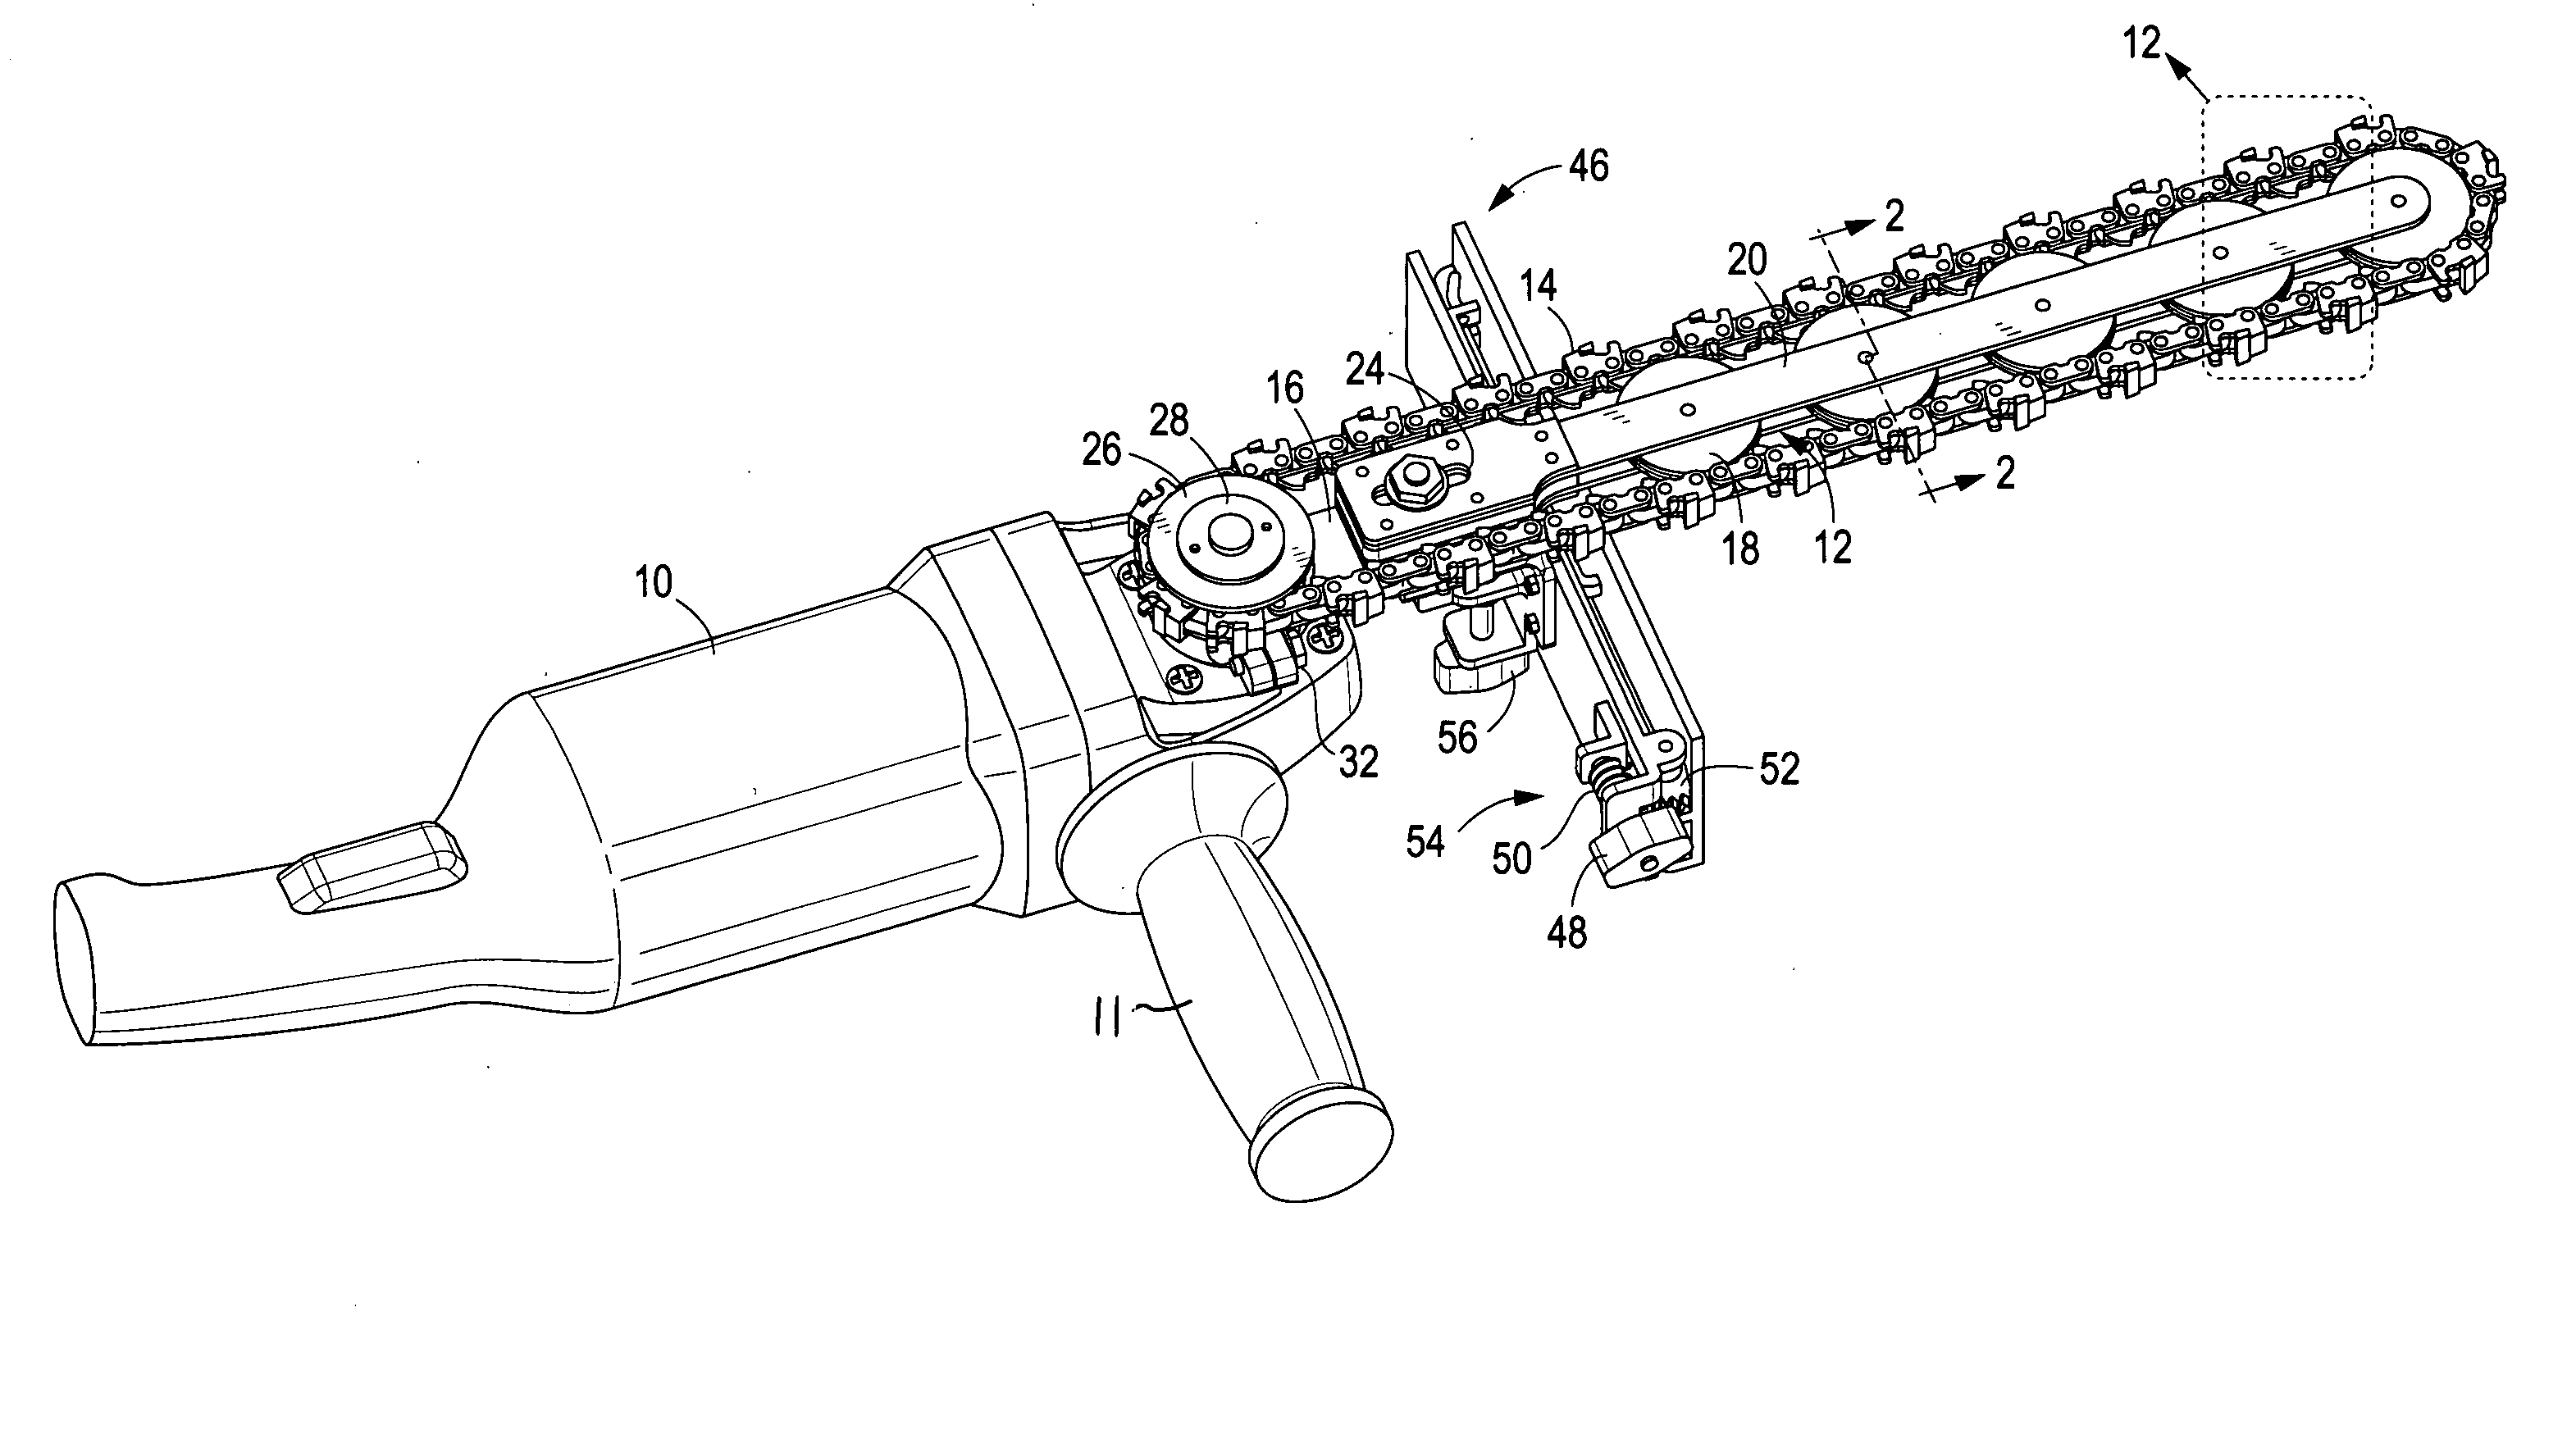 Chainsaw tool